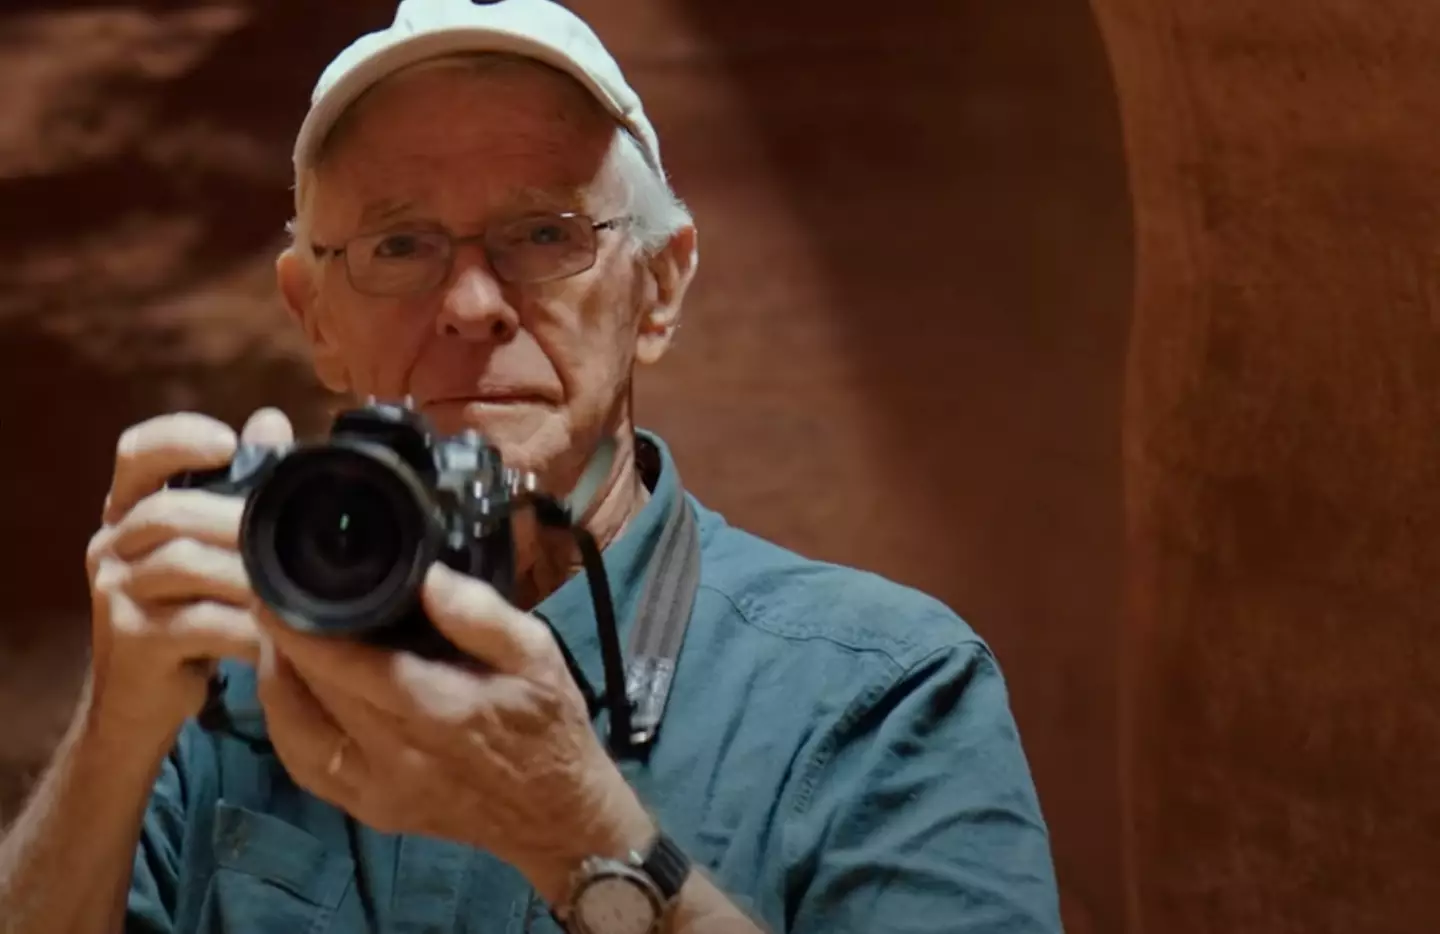 O'Rear spent 25 years as a photographer at National Geographic.